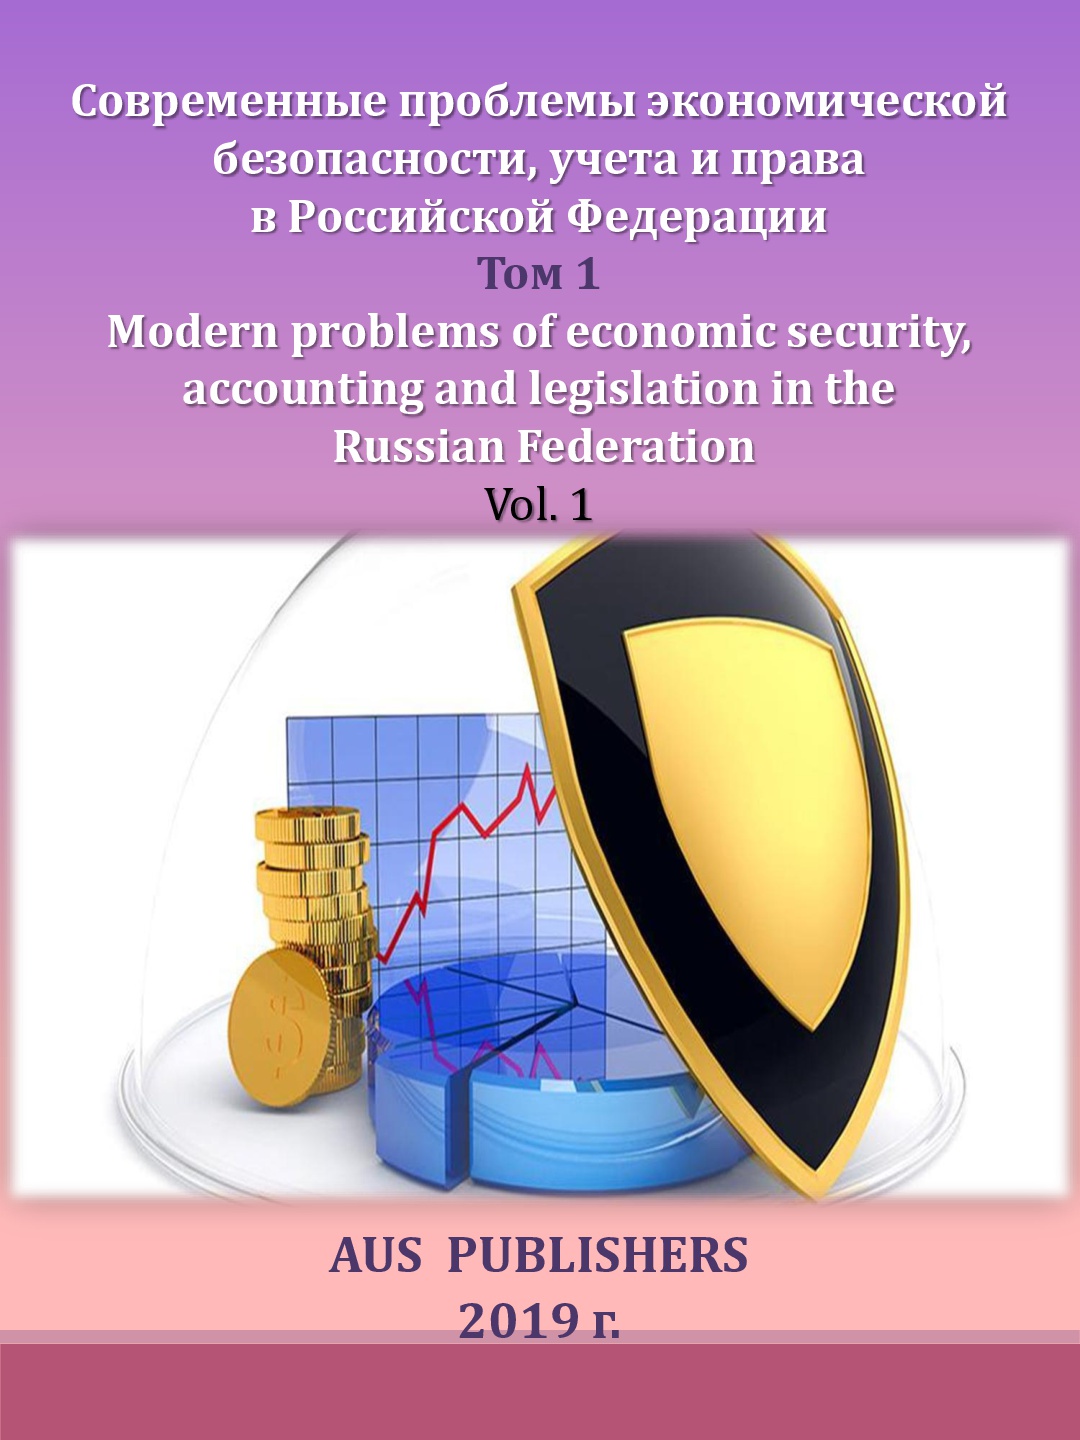                         Modern problems of an economic safety, accounting and the right in the Russian Federation. Vol.1
            